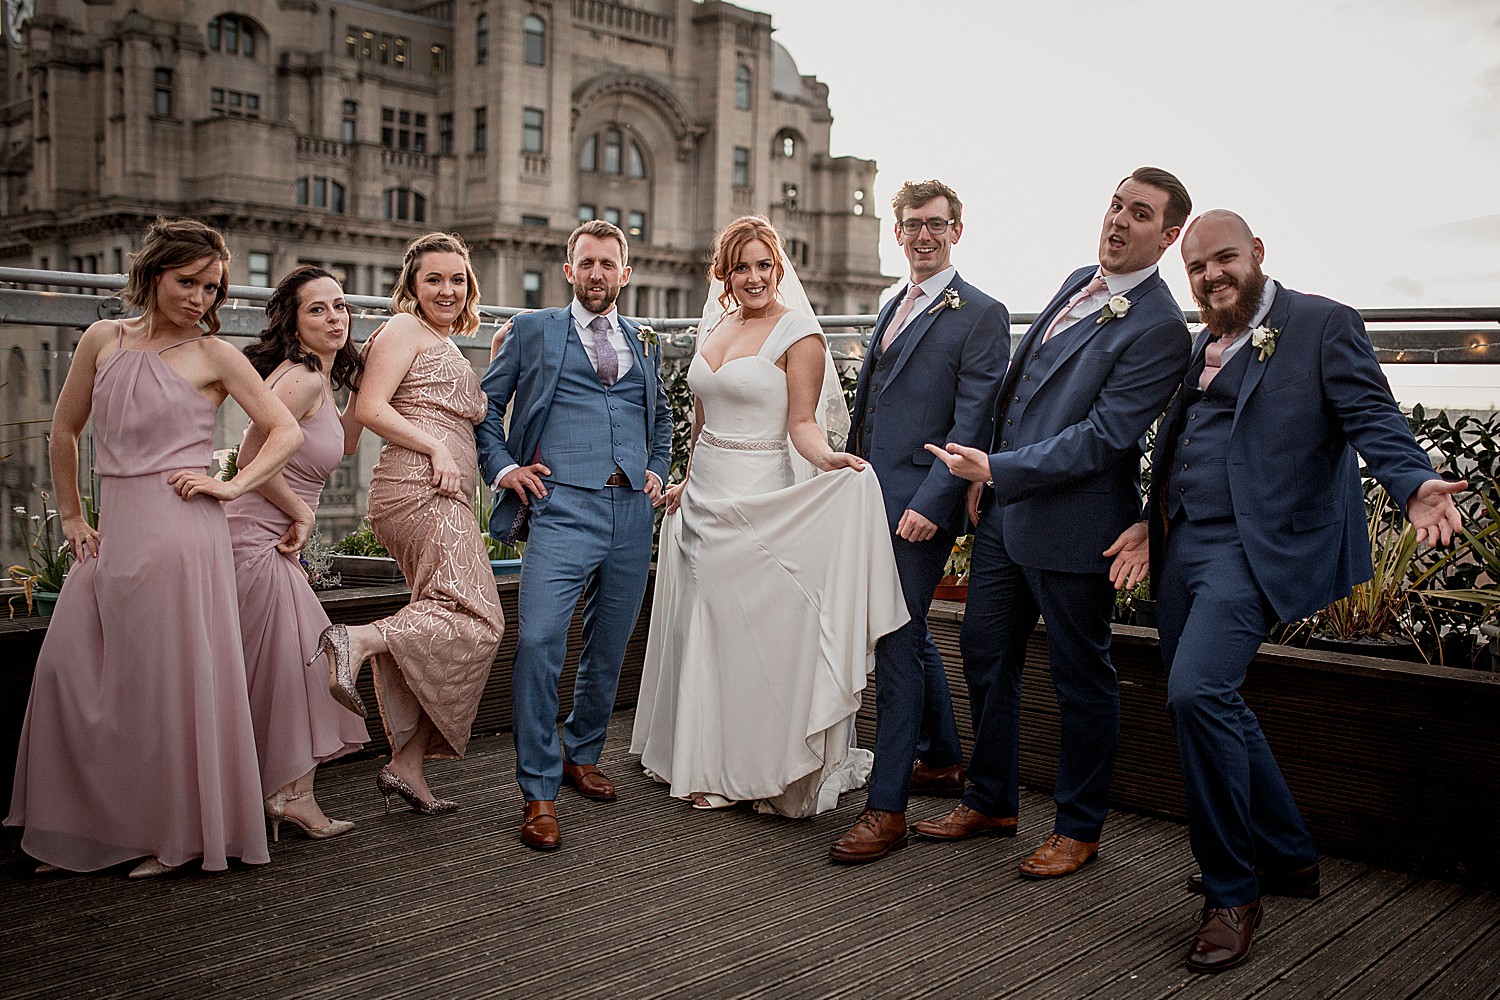 The bridal party pose on the roof terrace at Oh Me Oh My